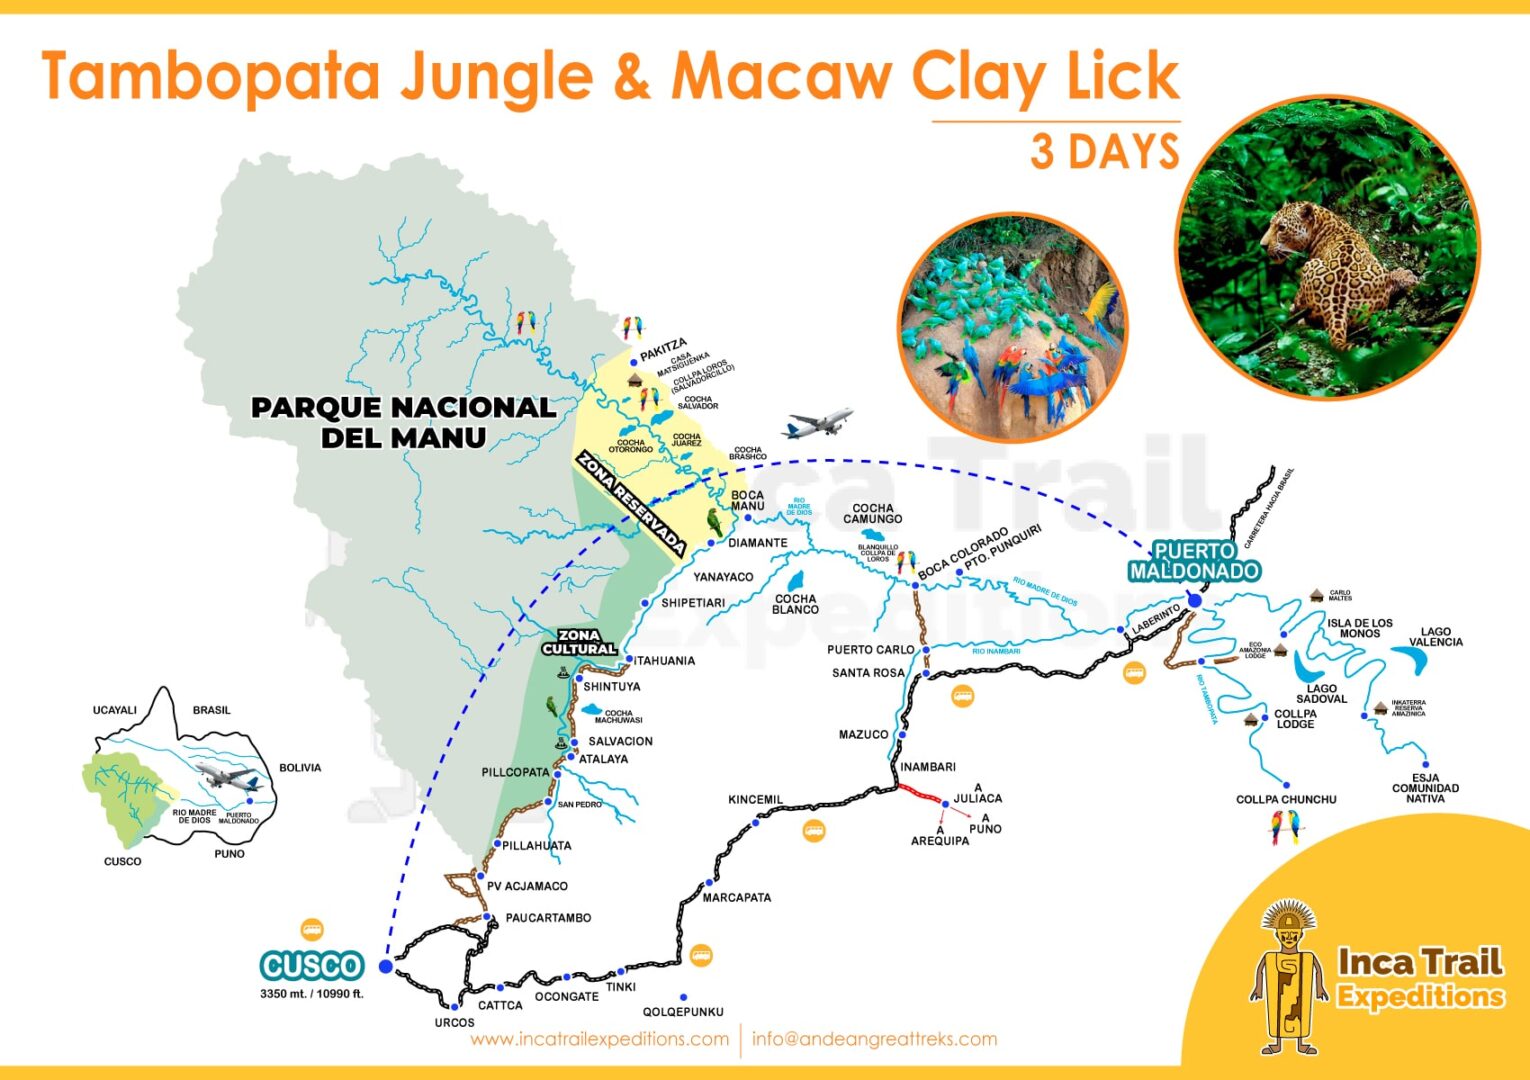 TAMBOPATA-JUNGLE-&-MACAW-CLAY-LICK-3-DAYS-BY-INCA-TRAIL-EXPEDITIONS